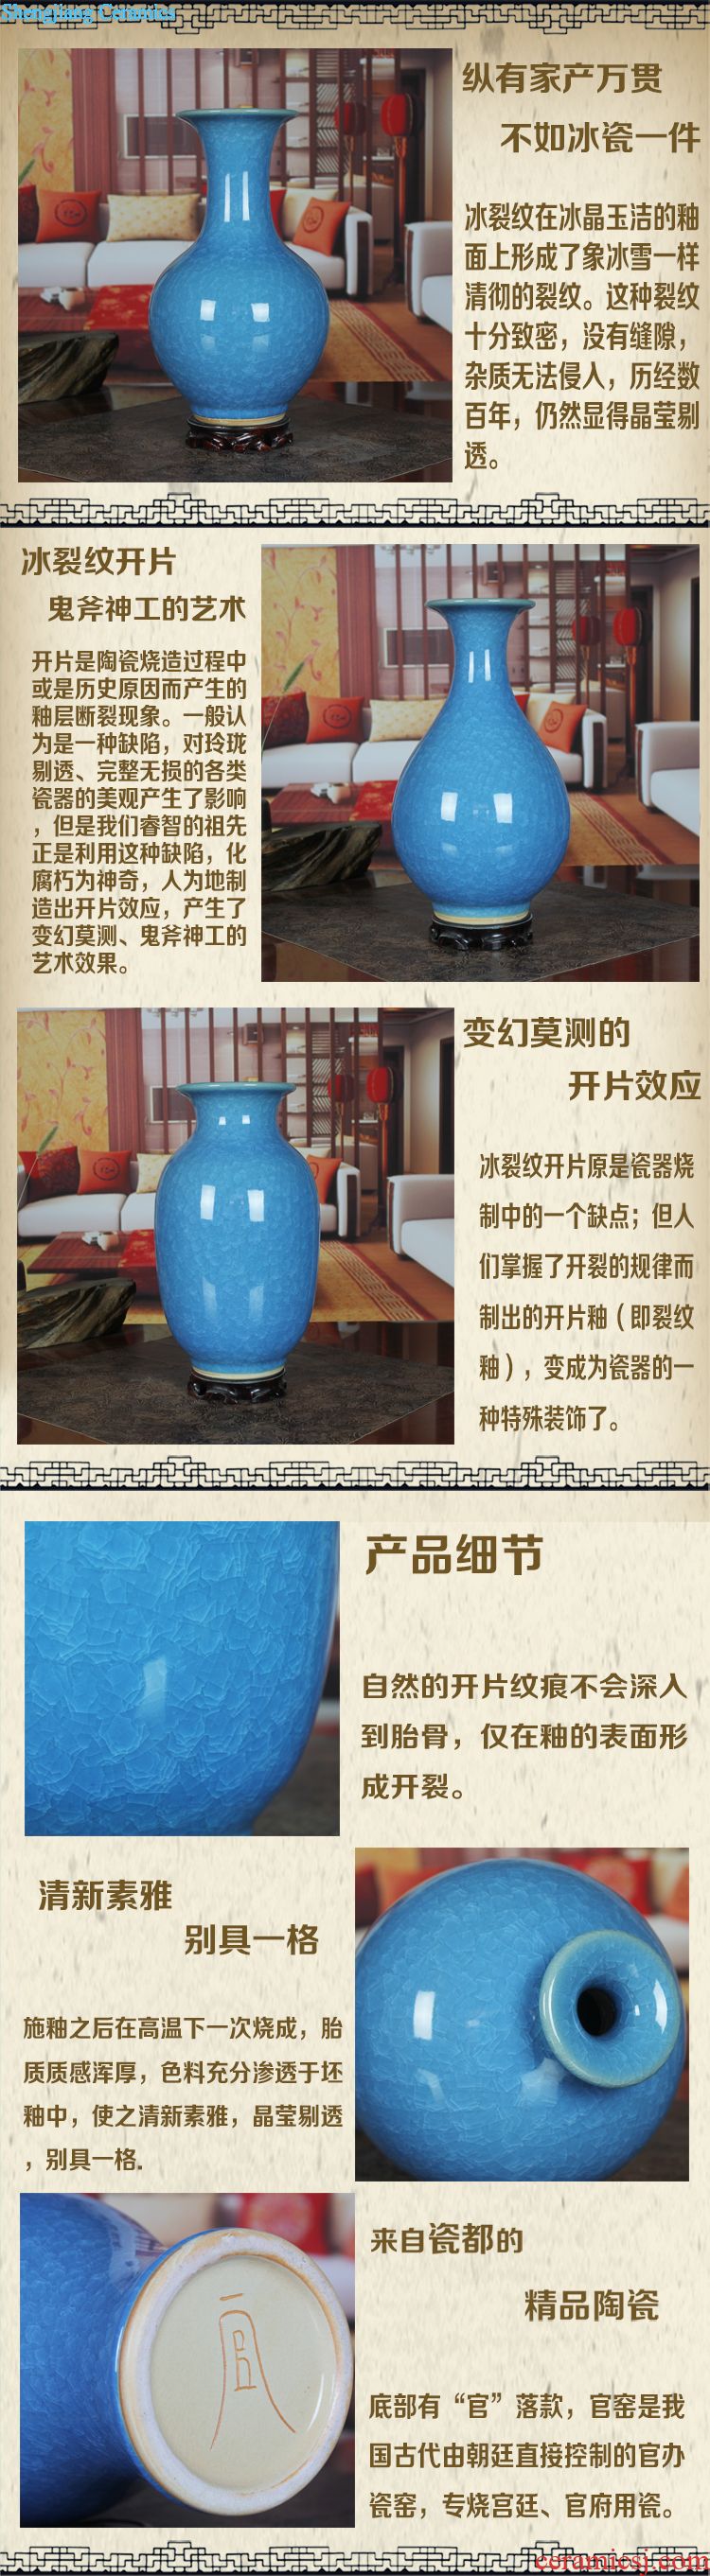 Jingdezhen ceramic famille rose porcelain vase merrily merrily contemporary household brush pot furnishing articles study office arts and crafts